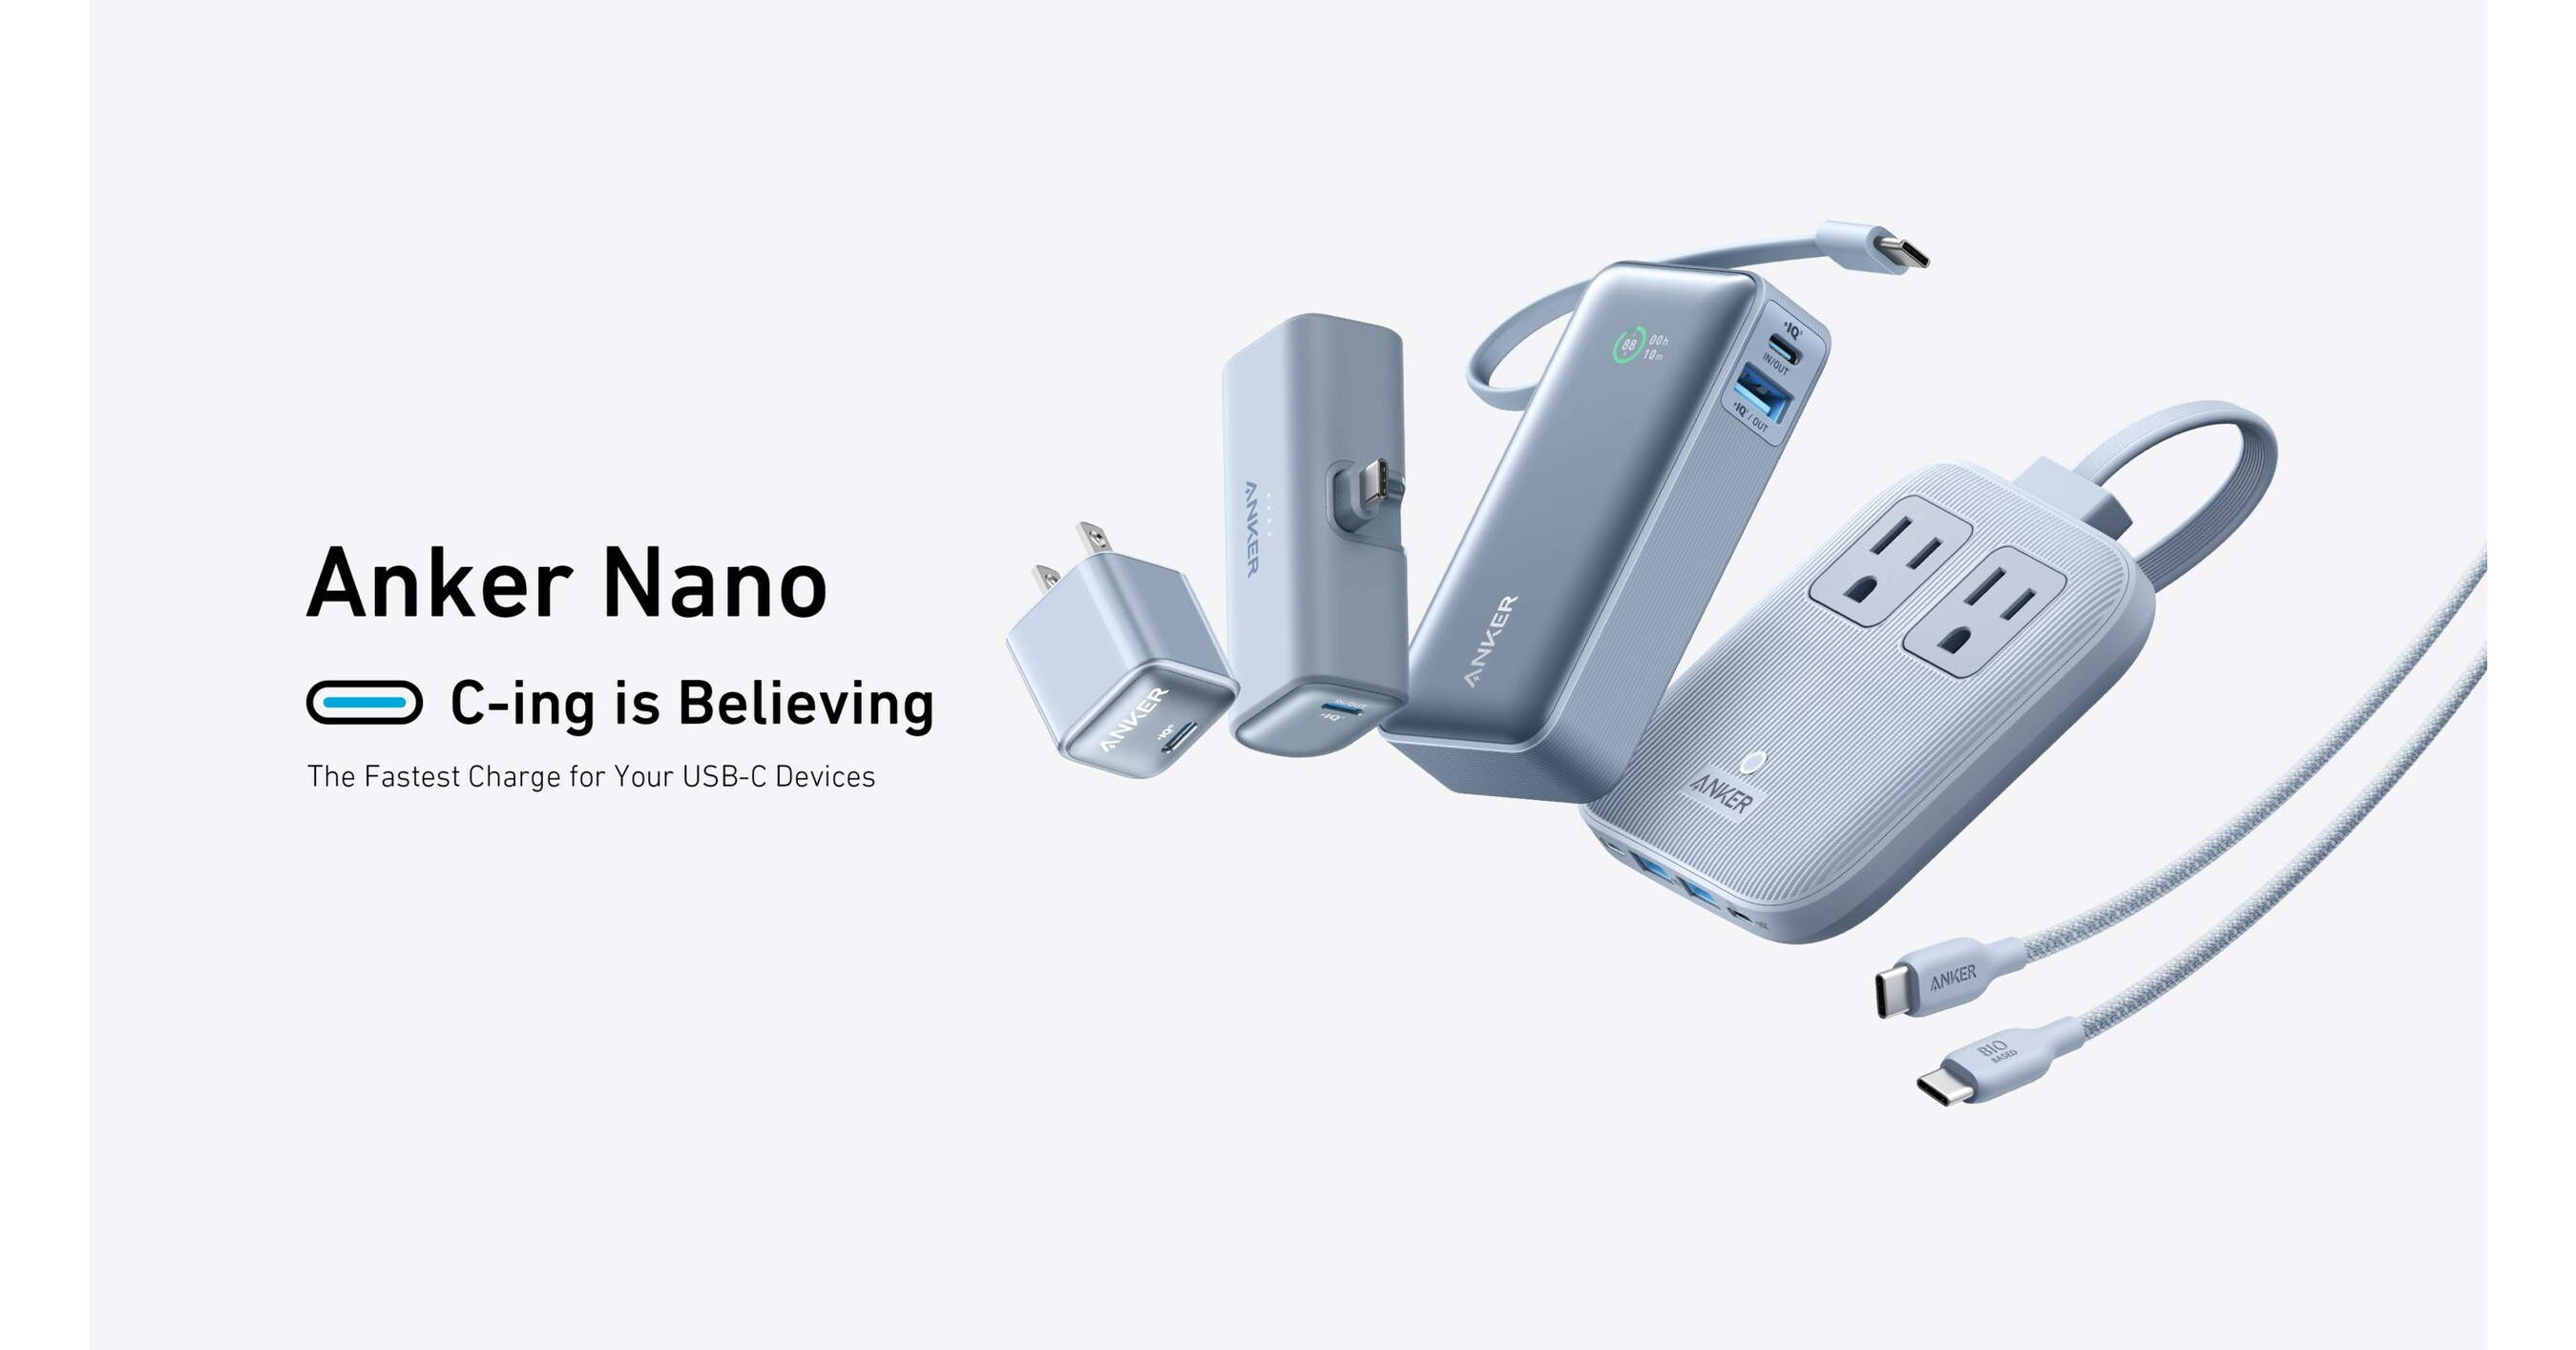 Anker’s Latest Nano Series of Charging Accessories are Colorful, Compact, and More Compatible Than Ever